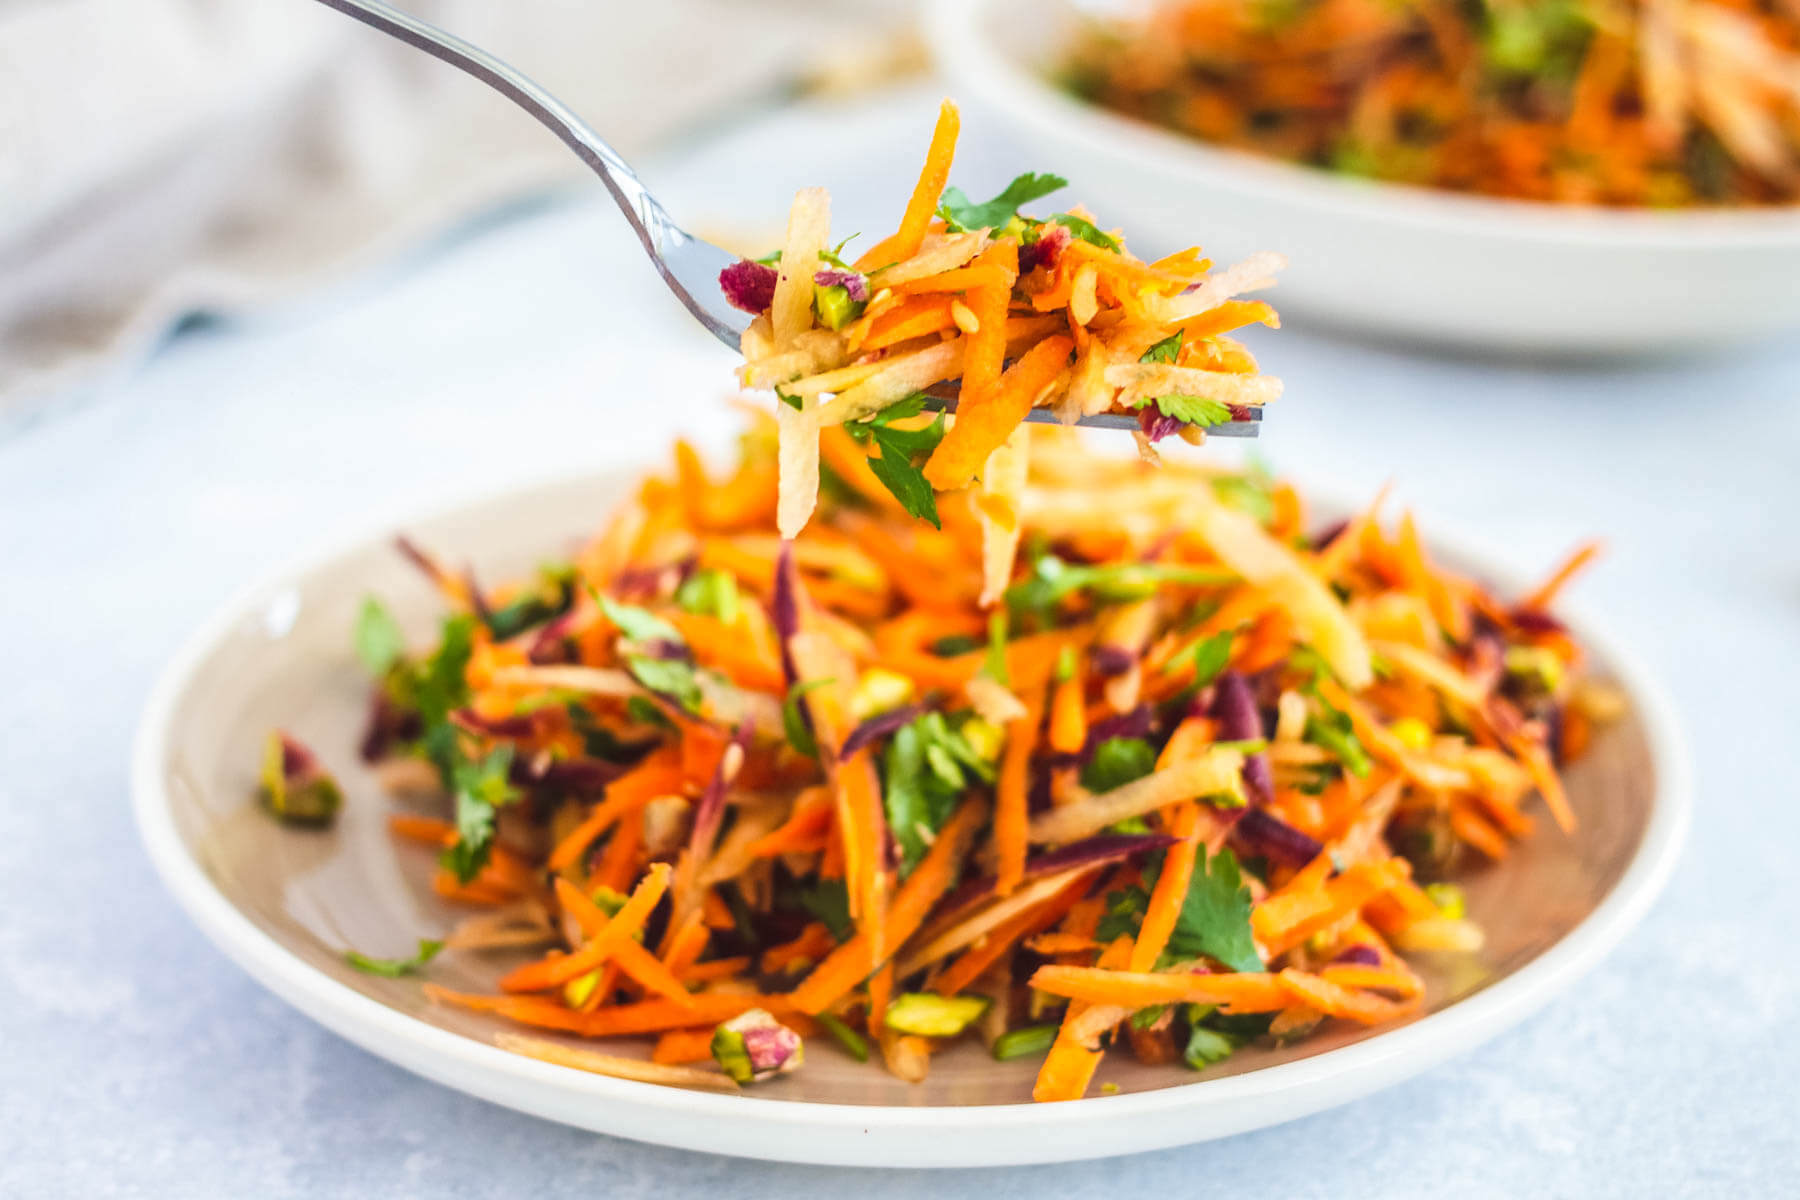 A fork holding colourful carrot salad over a bowl of salad.